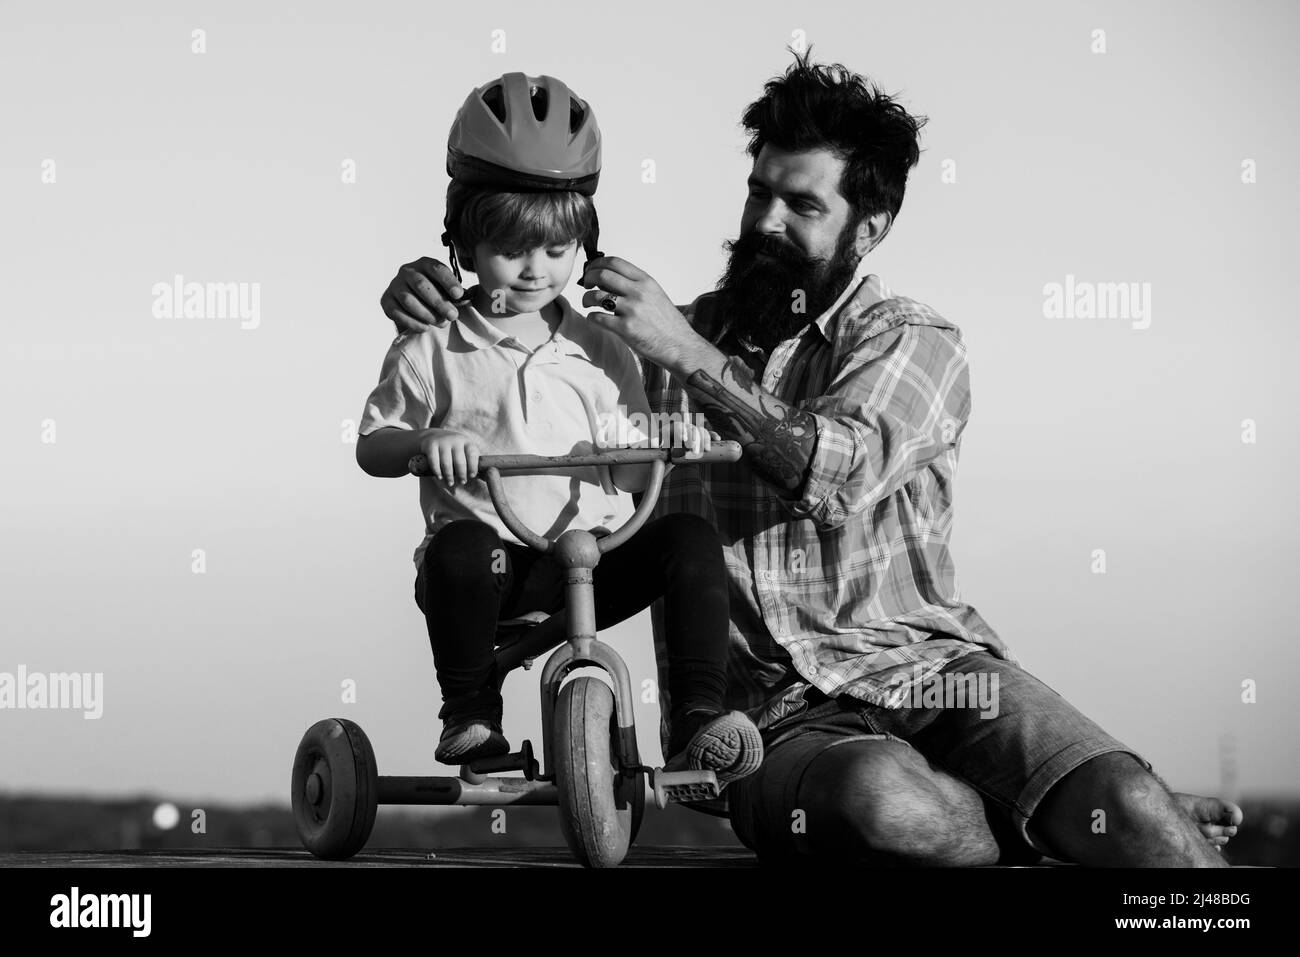 Help kid explore world. Happy loving family Father and son. Little boy wearing helmet while learning to ride cycle with his daddy. Stock Photo